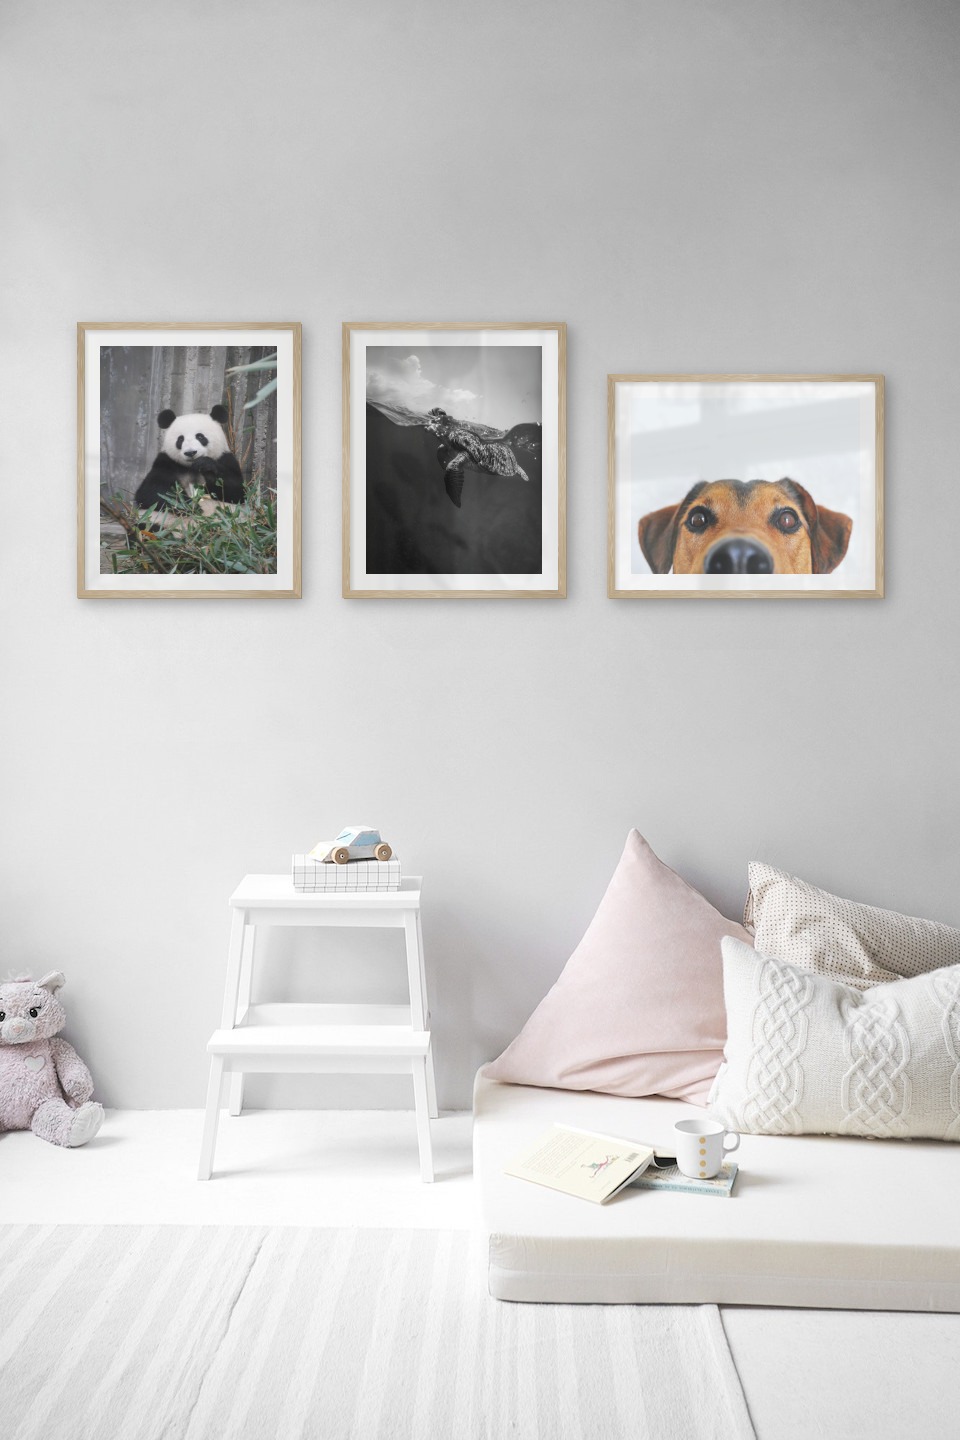 Gallery wall with picture frames in wood in sizes 40x50 with prints "Panda", "Turtle" and "Hundnos"